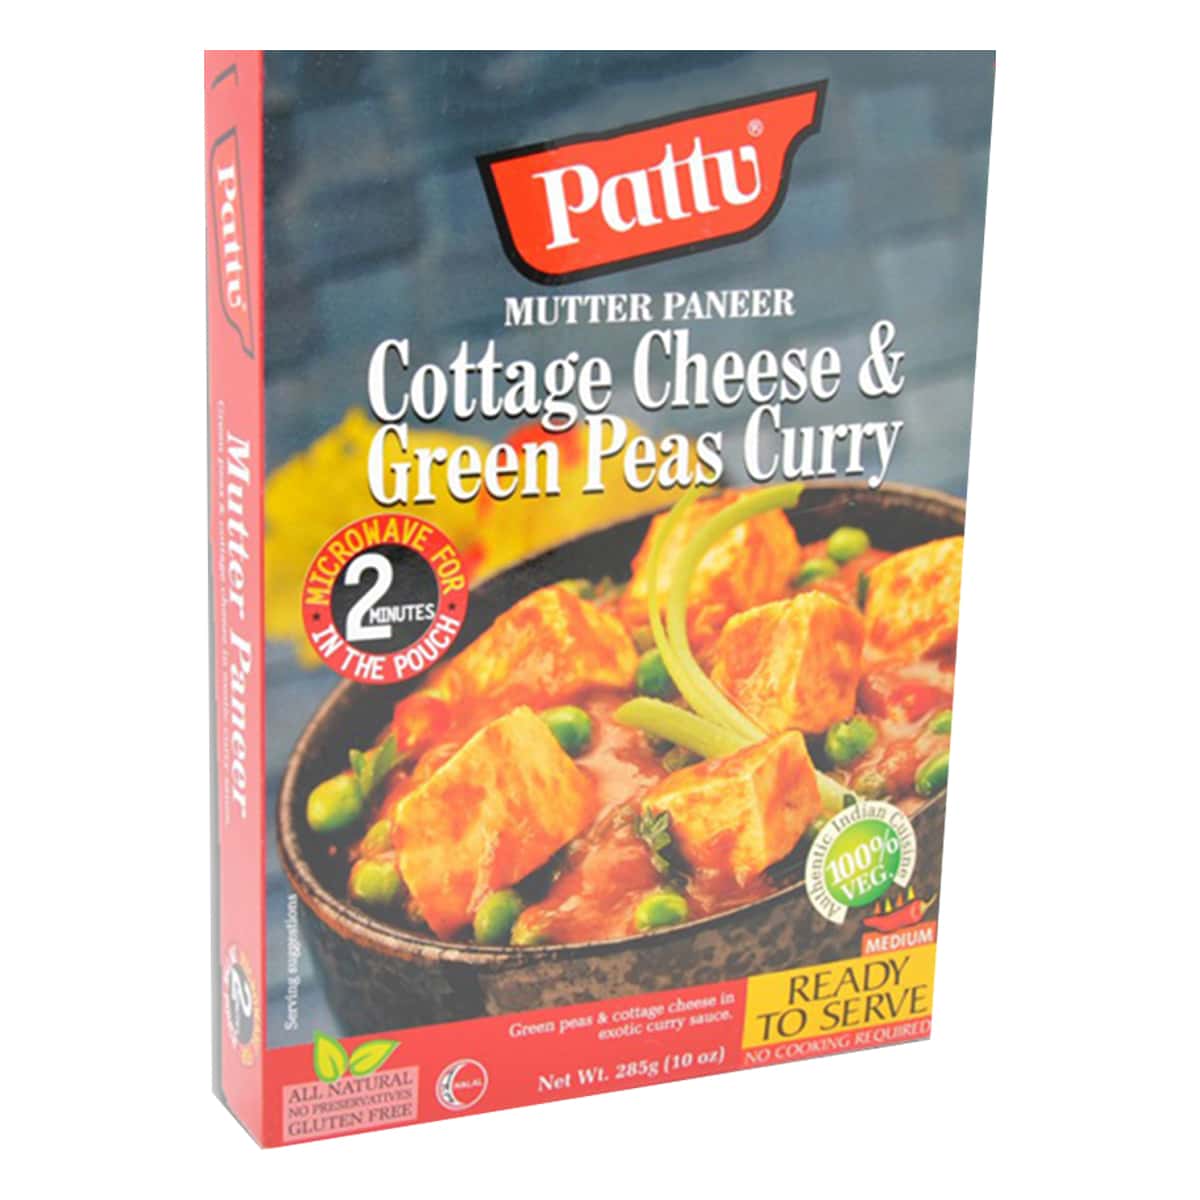 Buy Pattu Mutter Paneer (Cottage Cheese and Green Peas Curry) Ready to Serve - 285 gm